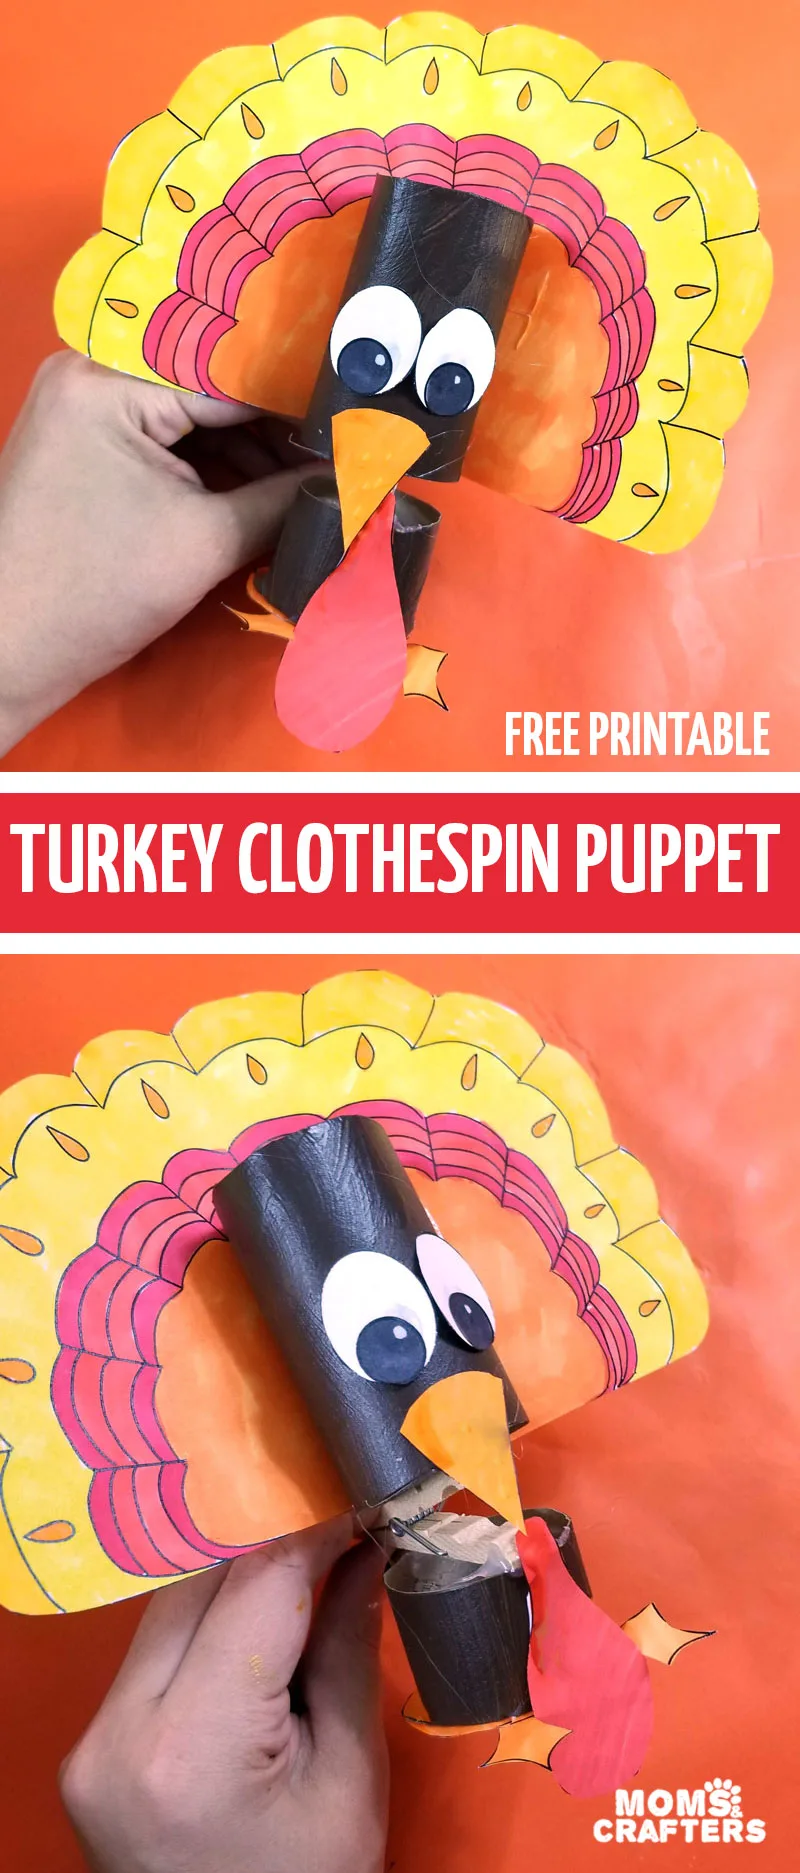 Click to print and download your own turkey puppet template. Make these super adorable thanksgiving crafts using recycled materials - including toilet paper rolls and clothespins! Perfect for kids!